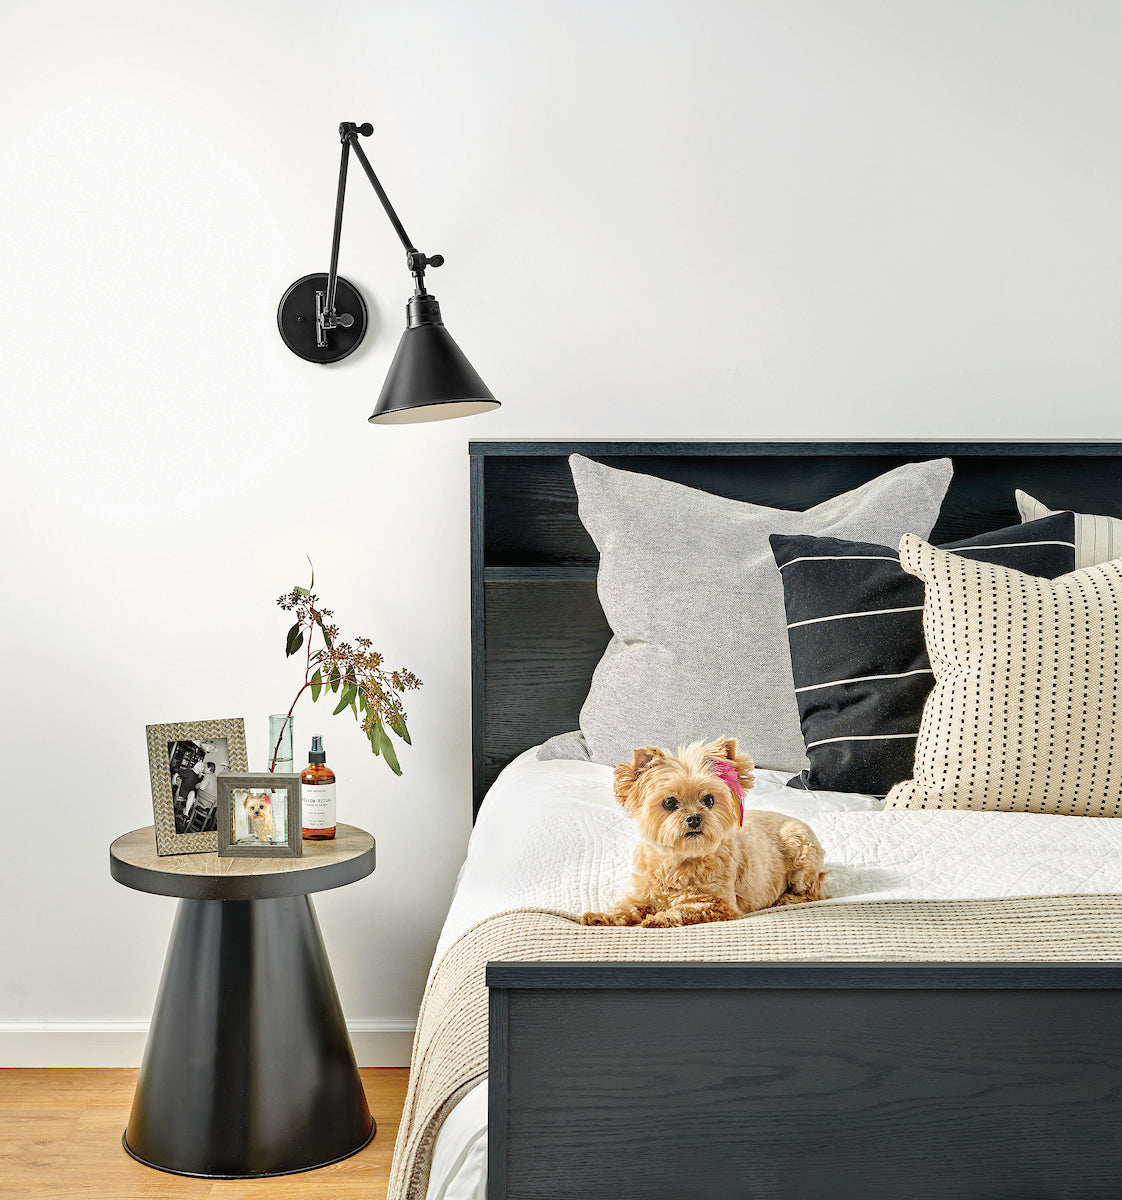 Black Arti wall sconce by Hinkley for reading by headboard in bedroom. Small dog and decorative throw pillows on bed.